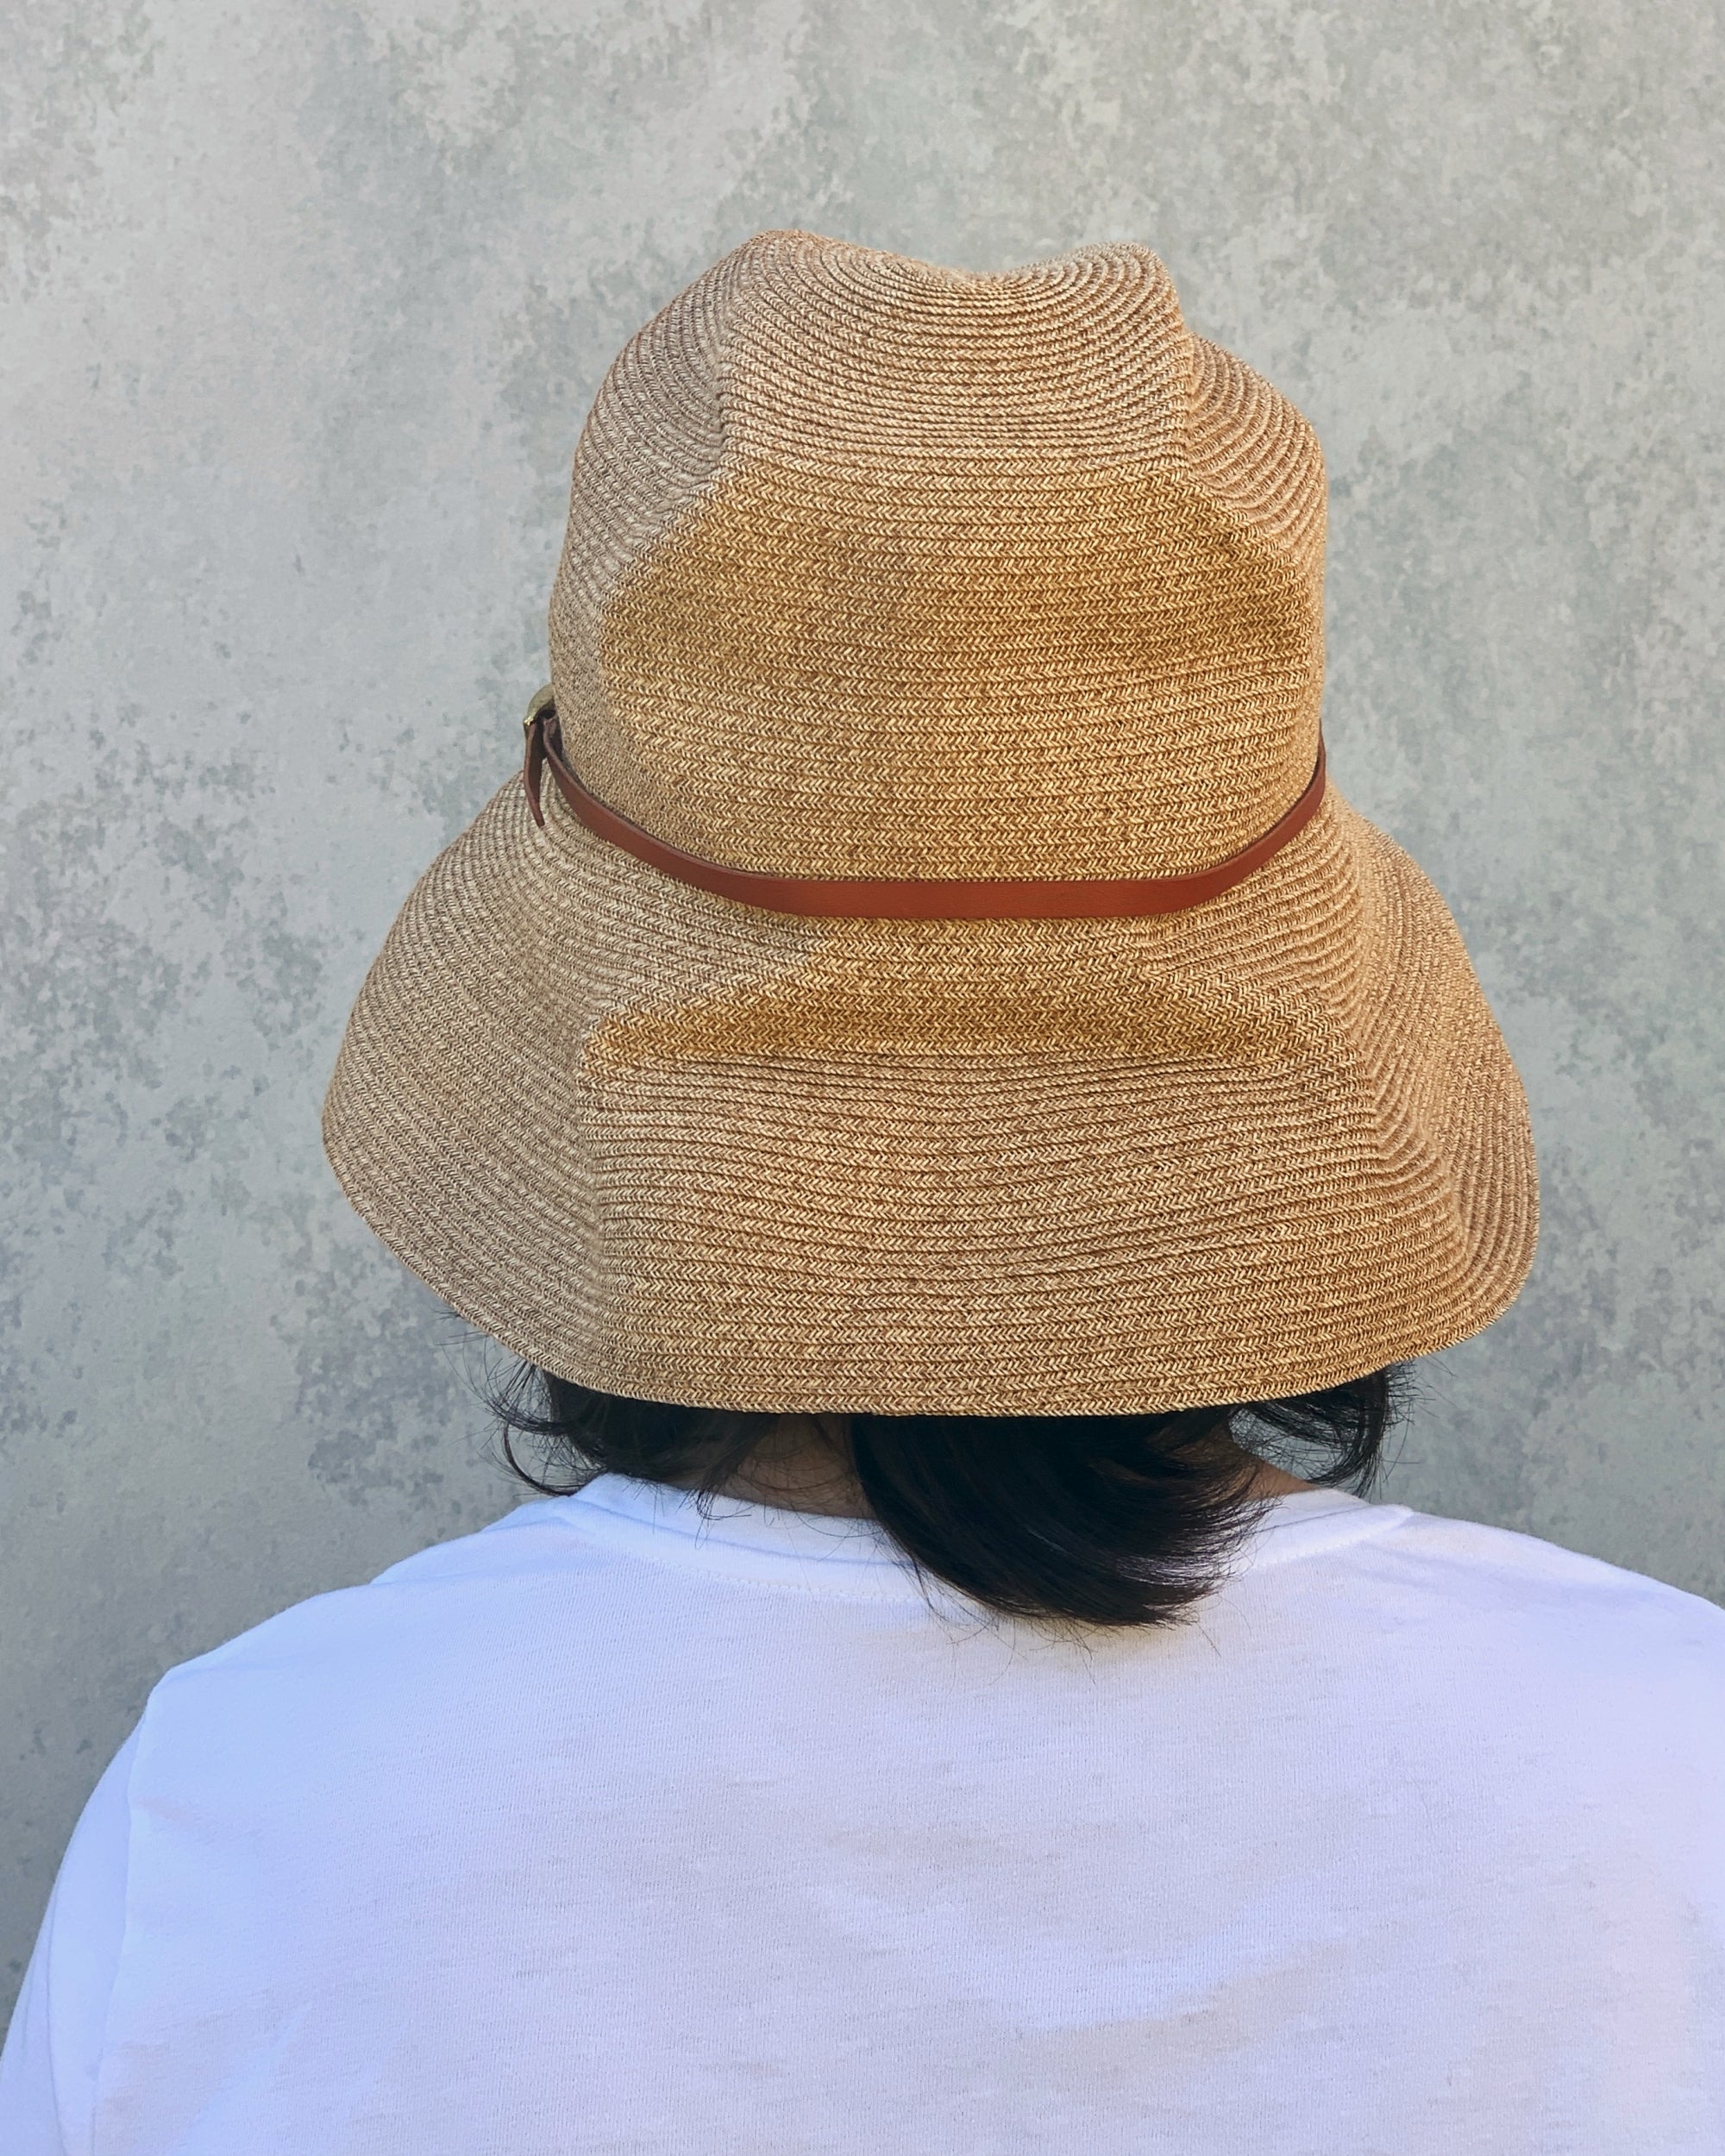 mature ha : boxed hat in barley with leather trim